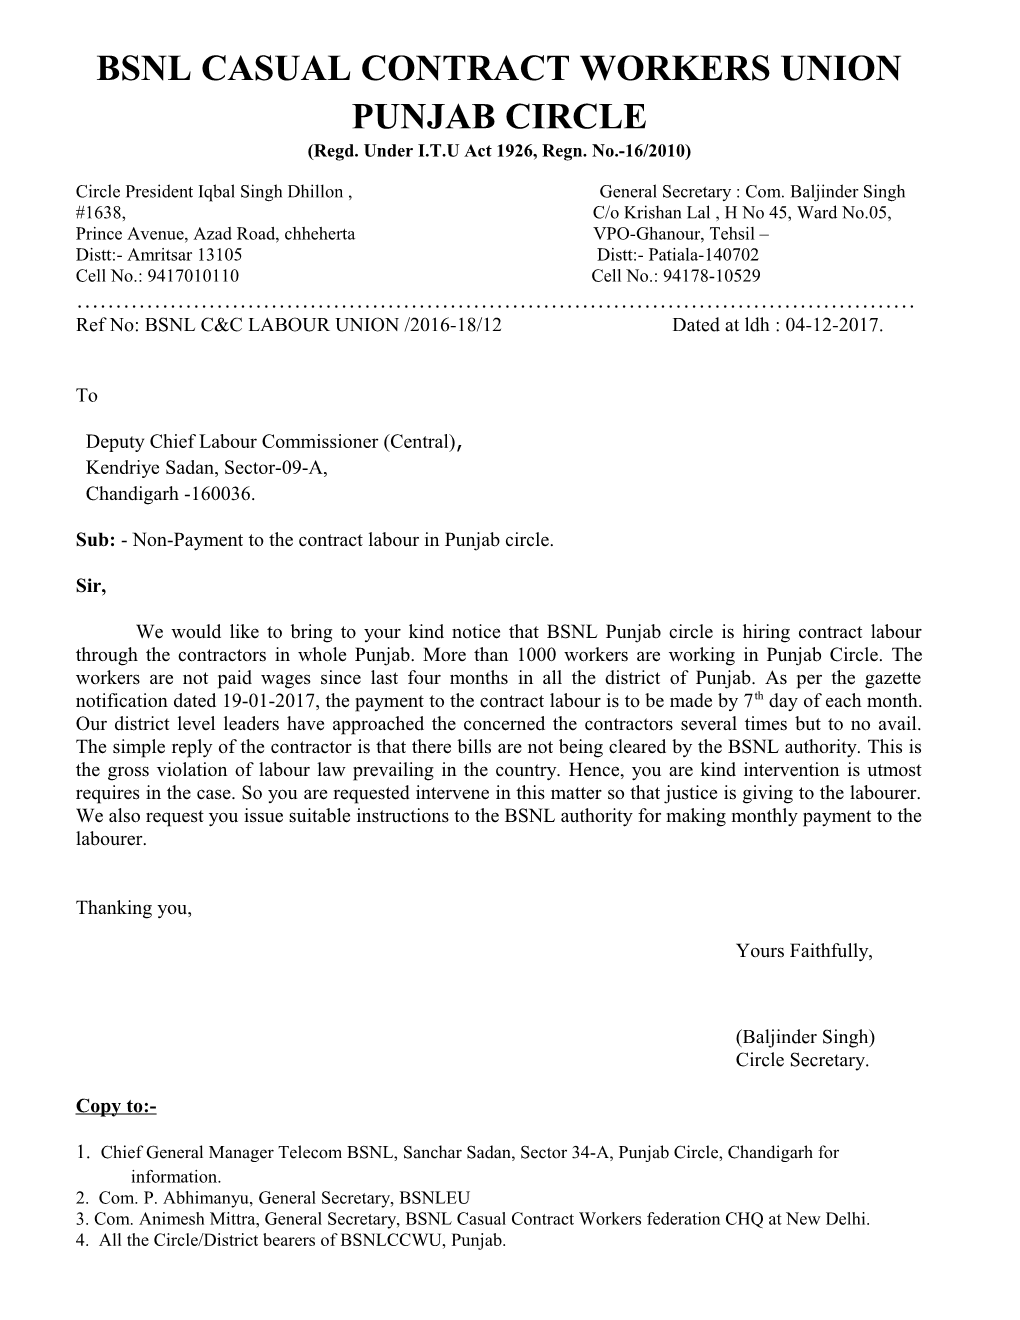 BSNL CASUAL CONTRACT WORKERS UNION PUNJAB CIRCLE (Regd. Under I.T.U Act 1926, Regn